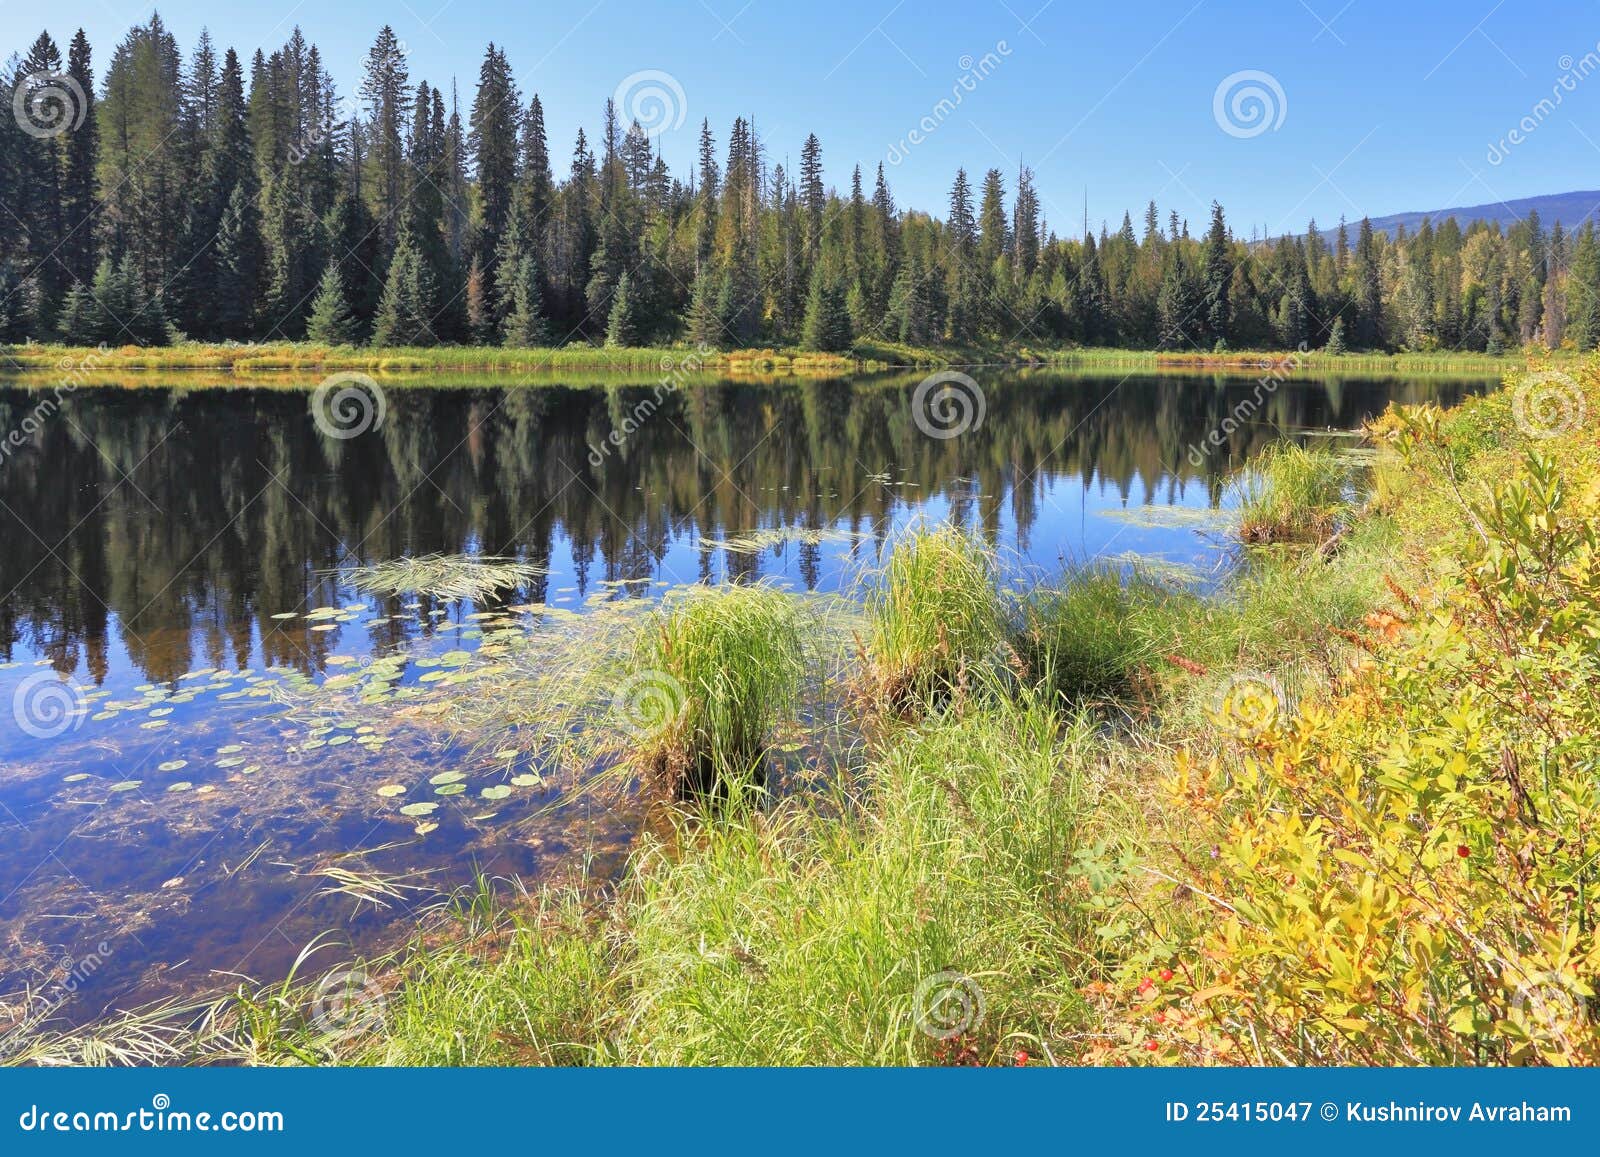 The Lake Is Surrounded By Dense Forest Stock Image Image Of Grass